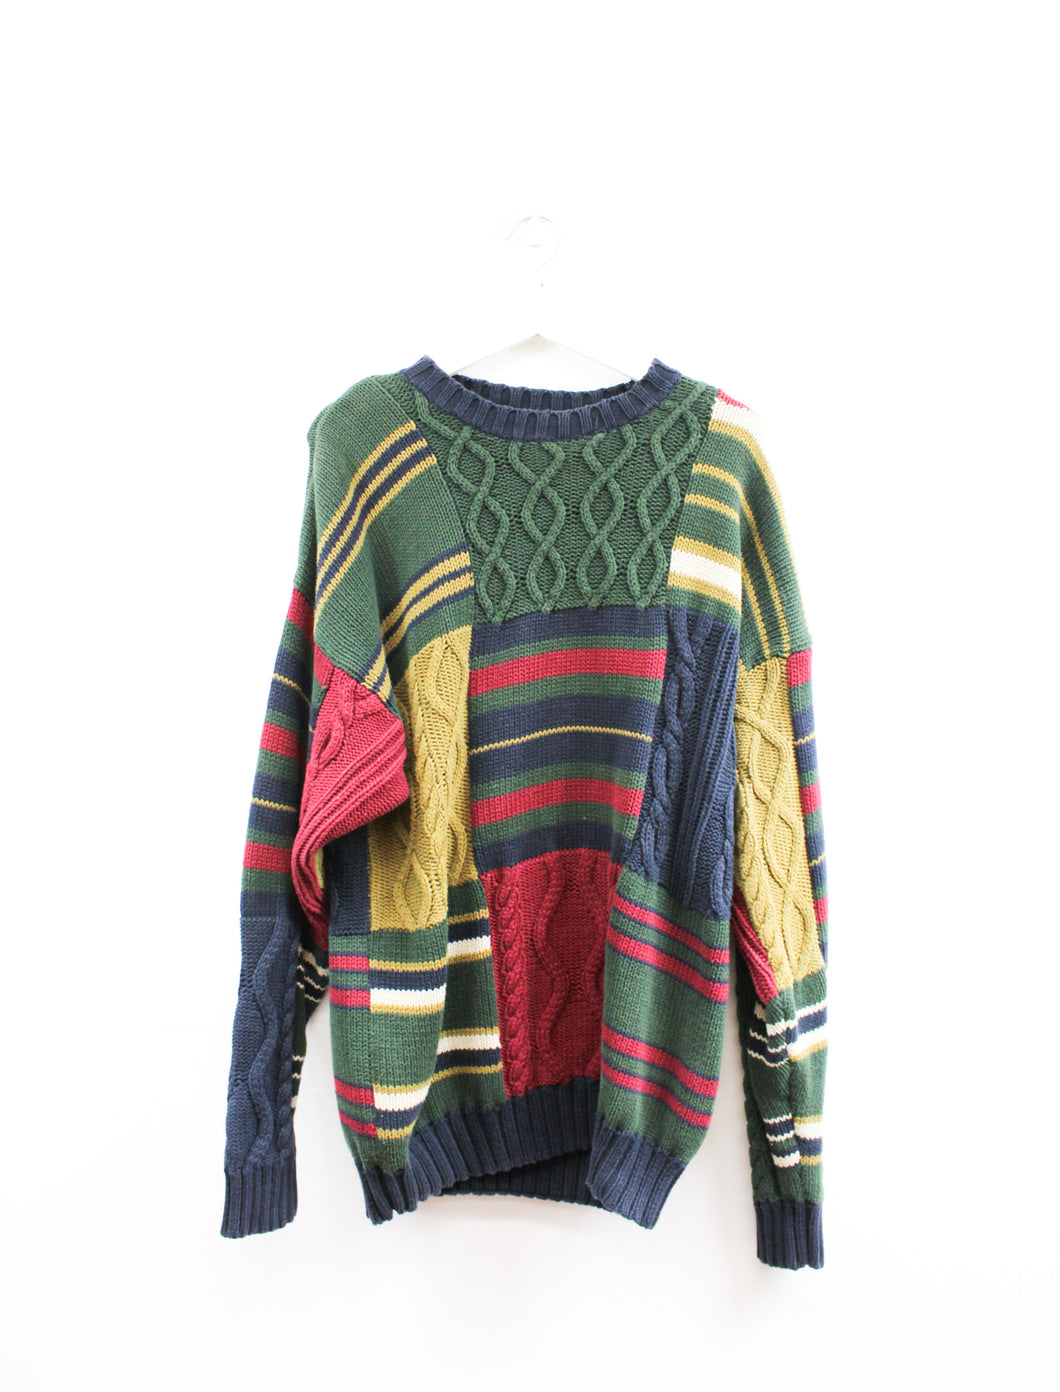 Vintage Woods & Gray Knit Sweater